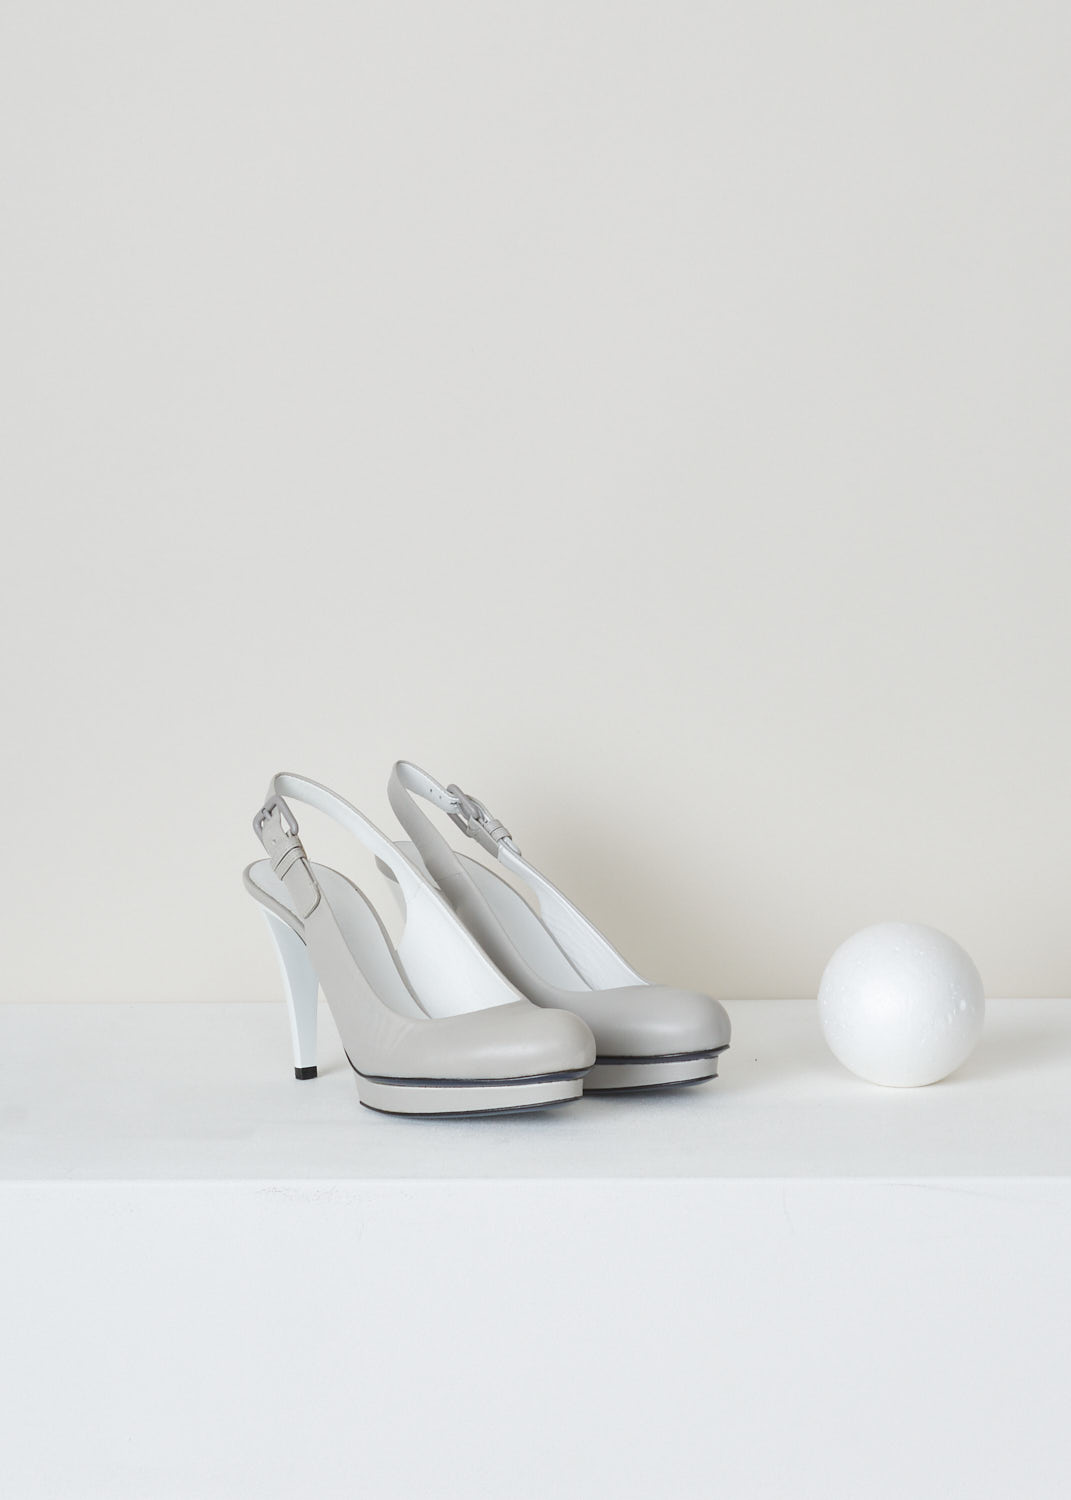 Jil Sanders, Slingback platform pumps in grey, JS22026_9A2M7_talco_807_polvere, grey, front, Lovely slingbacks pumps made with a platform underneath to spice it up a bit. fastening option being the buckle on the back.

Heel Height: 9 cm / 3.5 inch.  